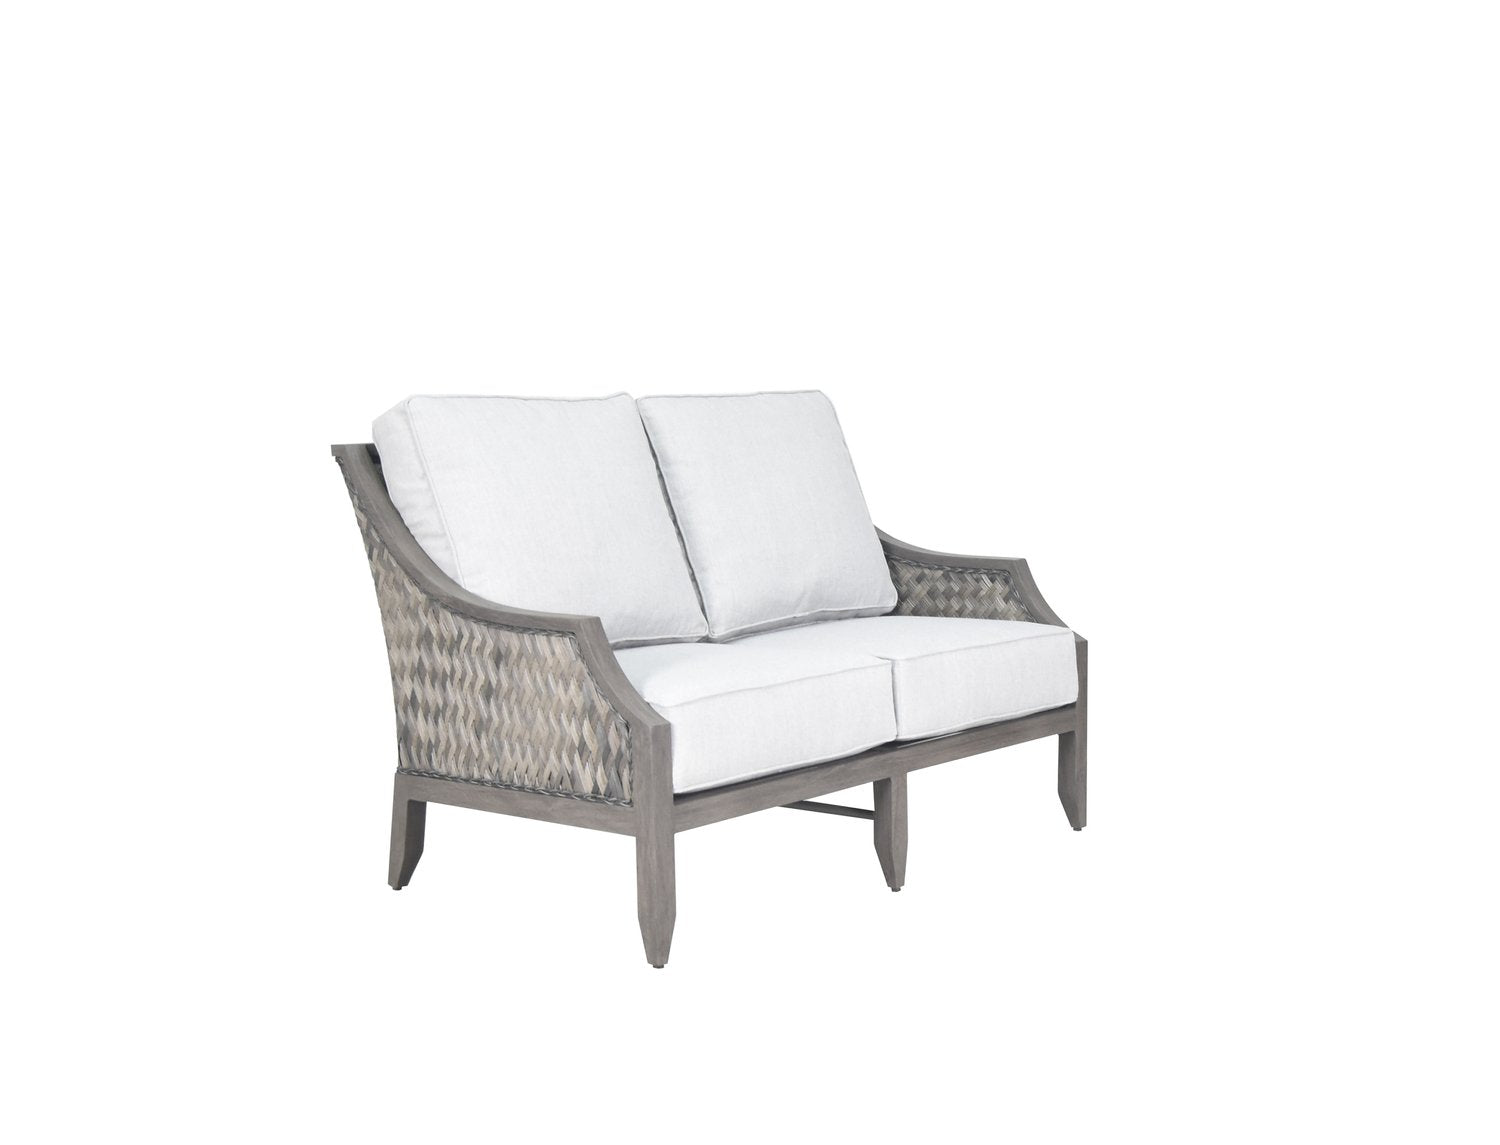 Vieques Loveseat By Patio Renaissance